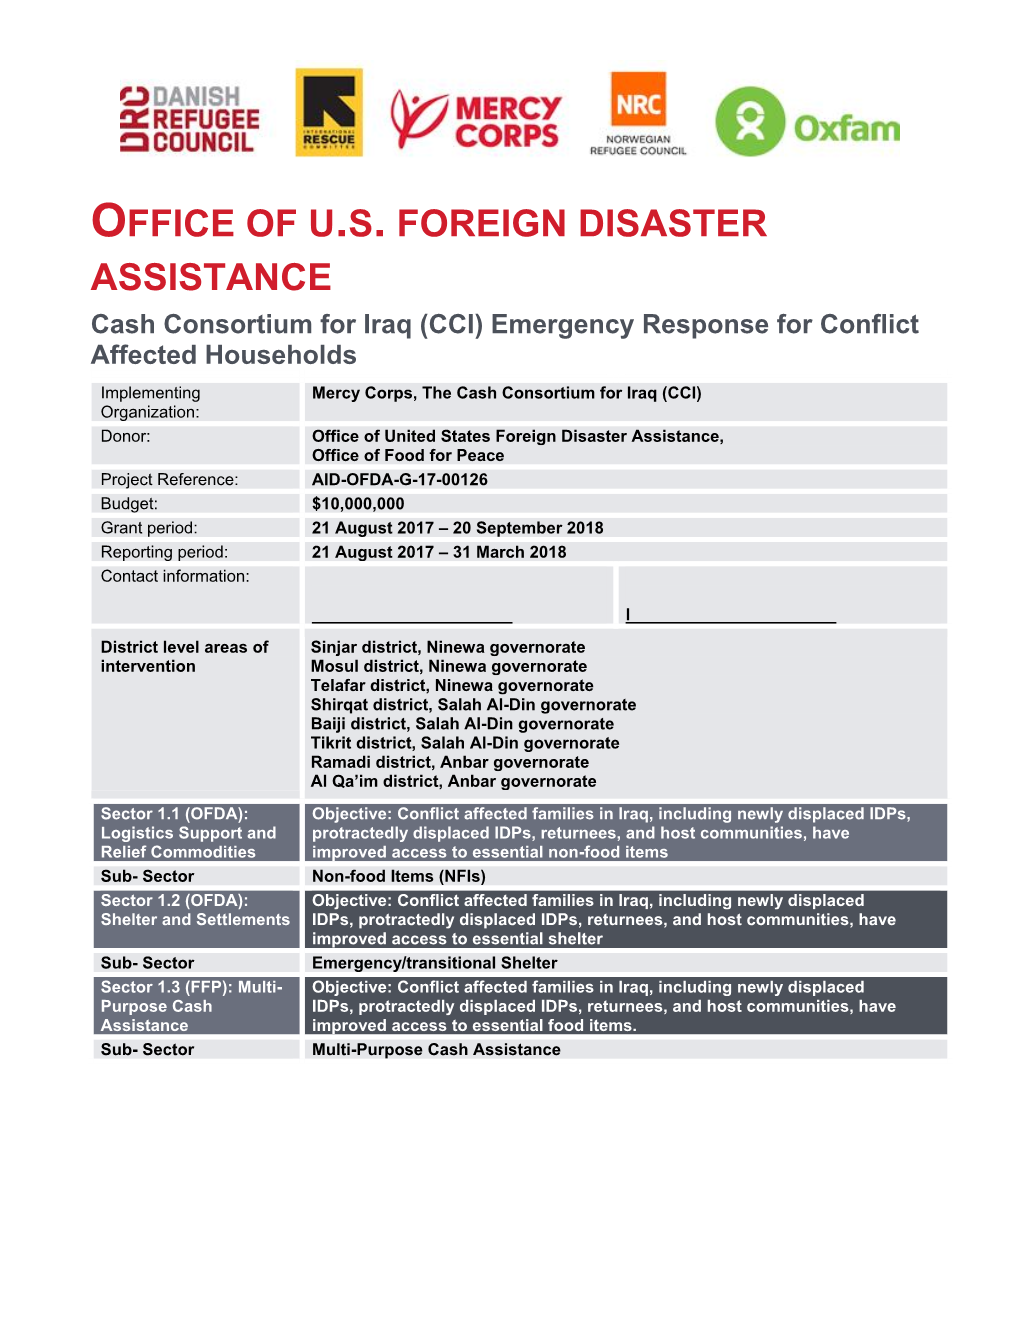 OFFICE of U.S. FOREIGN DISASTER ASSISTANCE Cash Consortium for Iraq (CCI) Emergency Response for Conflict Affected Households